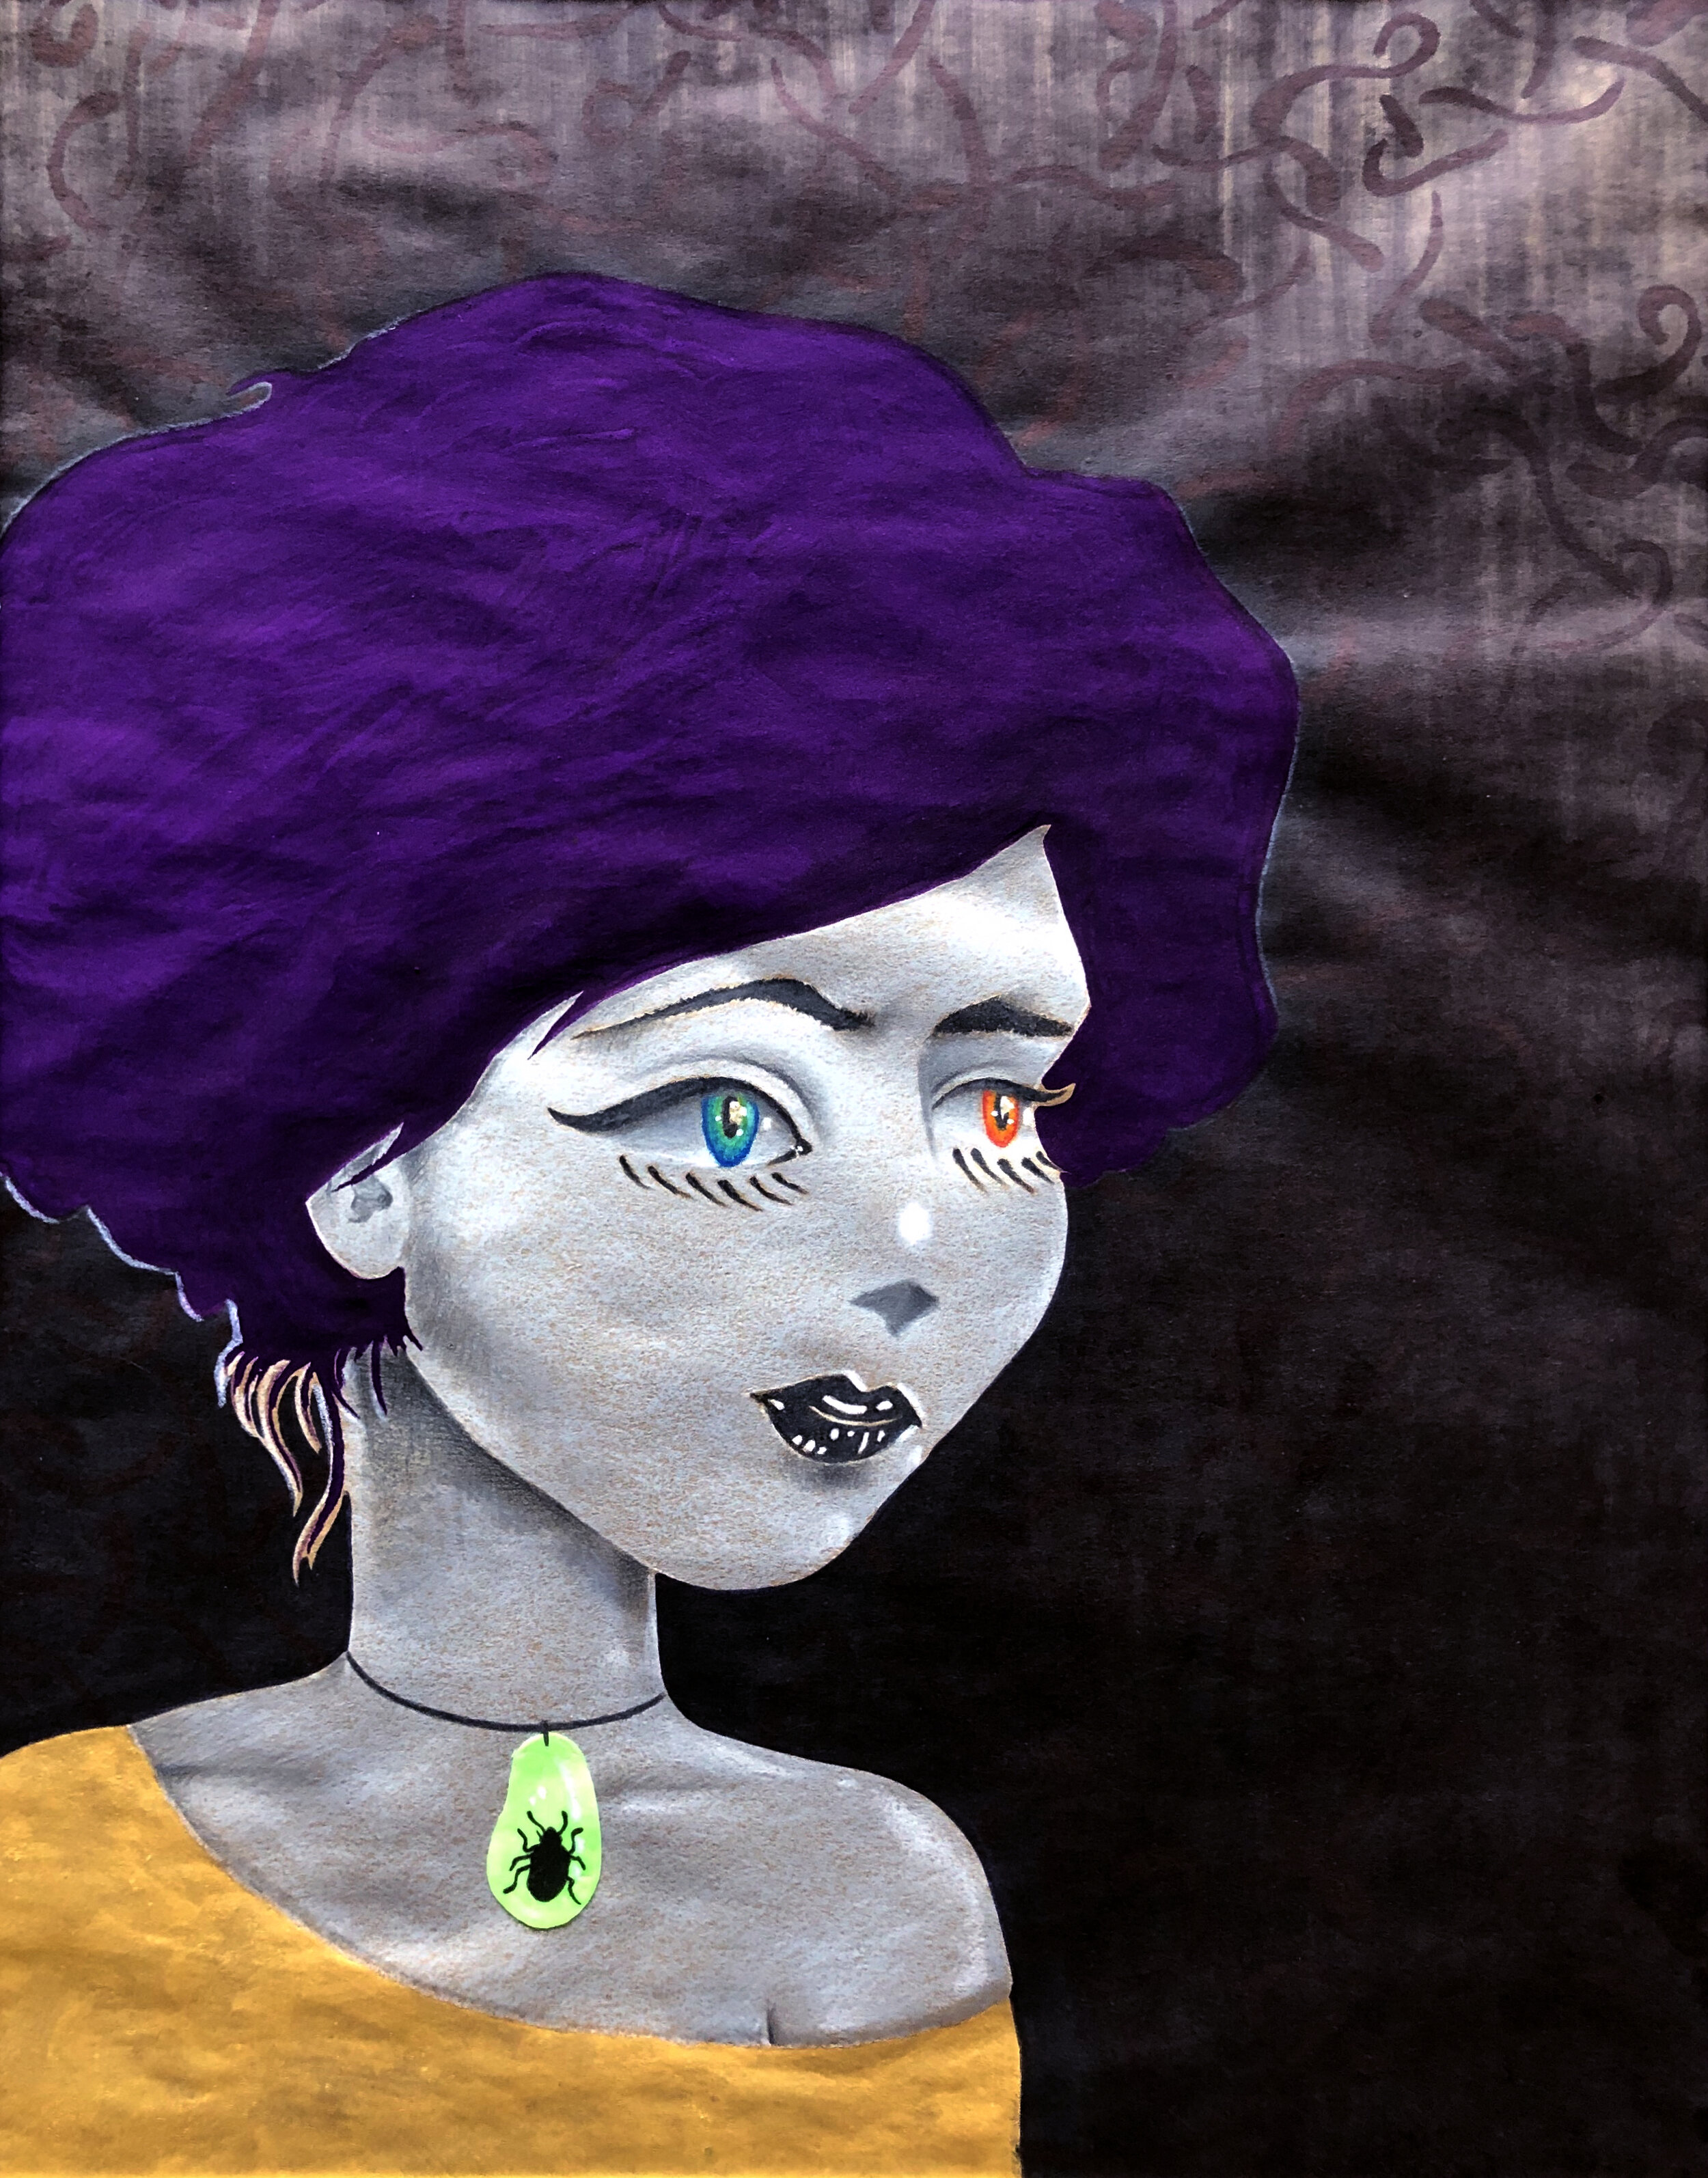   Purple Hair  portrait of the little girl staring into the abyss. 2019  exhibited -  Bailey Contemporary Arts during Pages From The Big Book 2022  